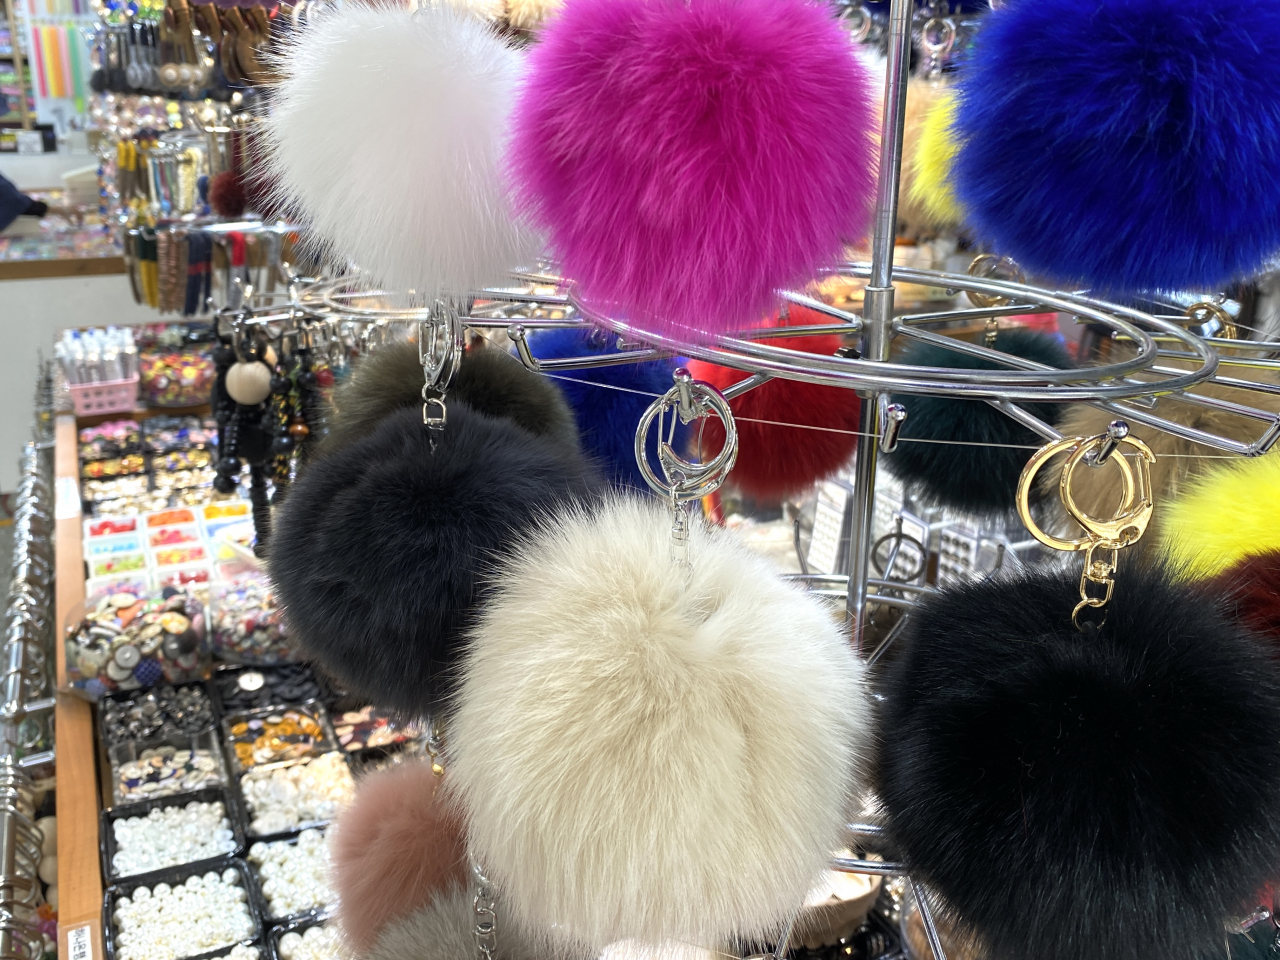 Fluffy ball keychains are hung on a display stand. (Hwang Joo-young/The Korea Herald)